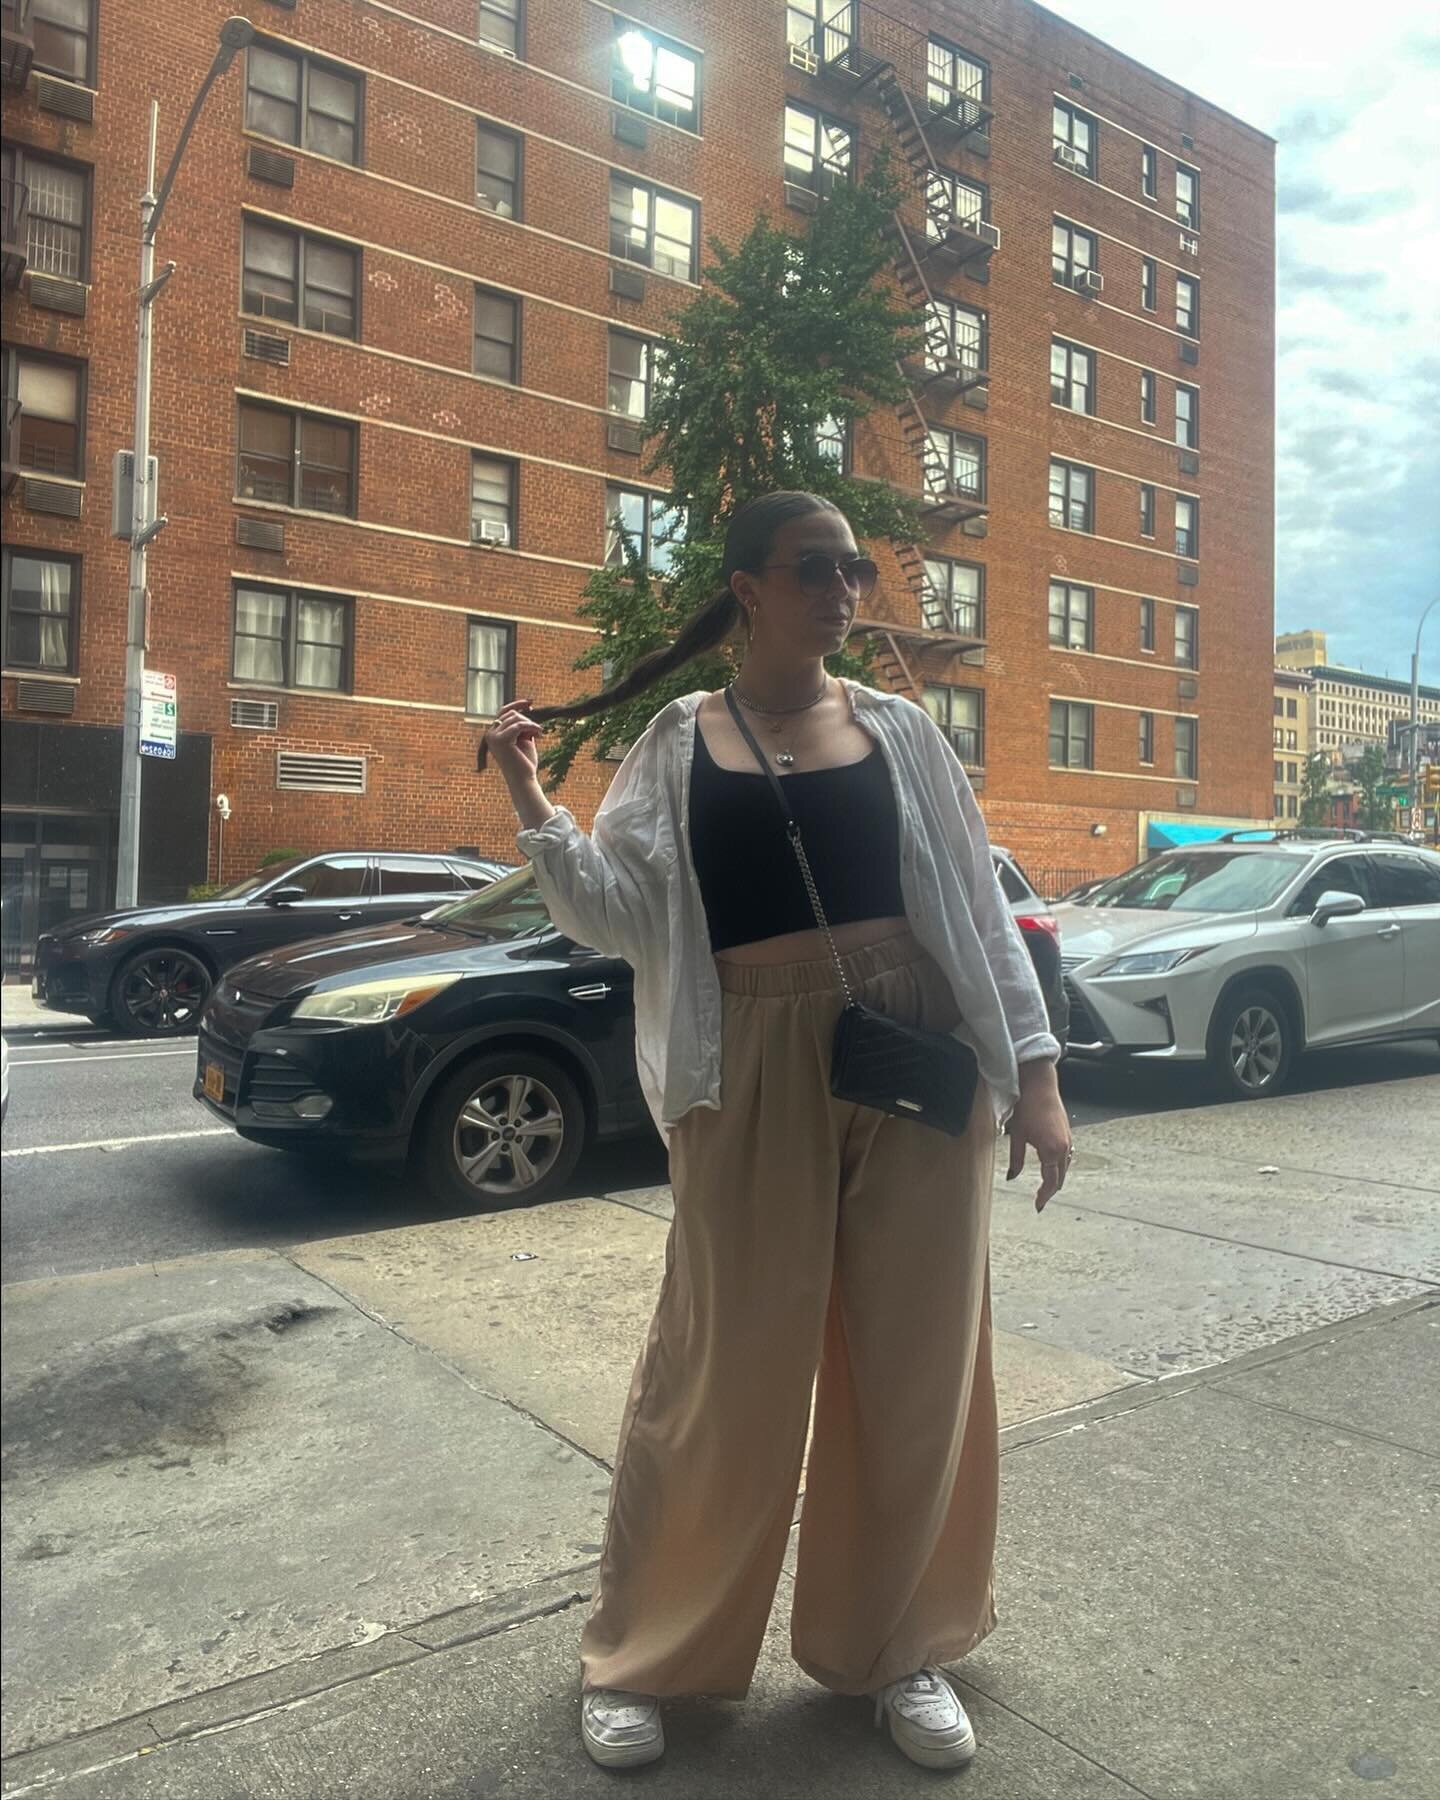 petition to bring back the warm weather immediately please and thank you 🥰 

#stylediaries #styleonthestreets #neutraloutfit #cityaesthetic #femfeed #getdressedwithme #outfitlook #stylehunters #getmylook #mywhowhatwear street style, fashion style, o